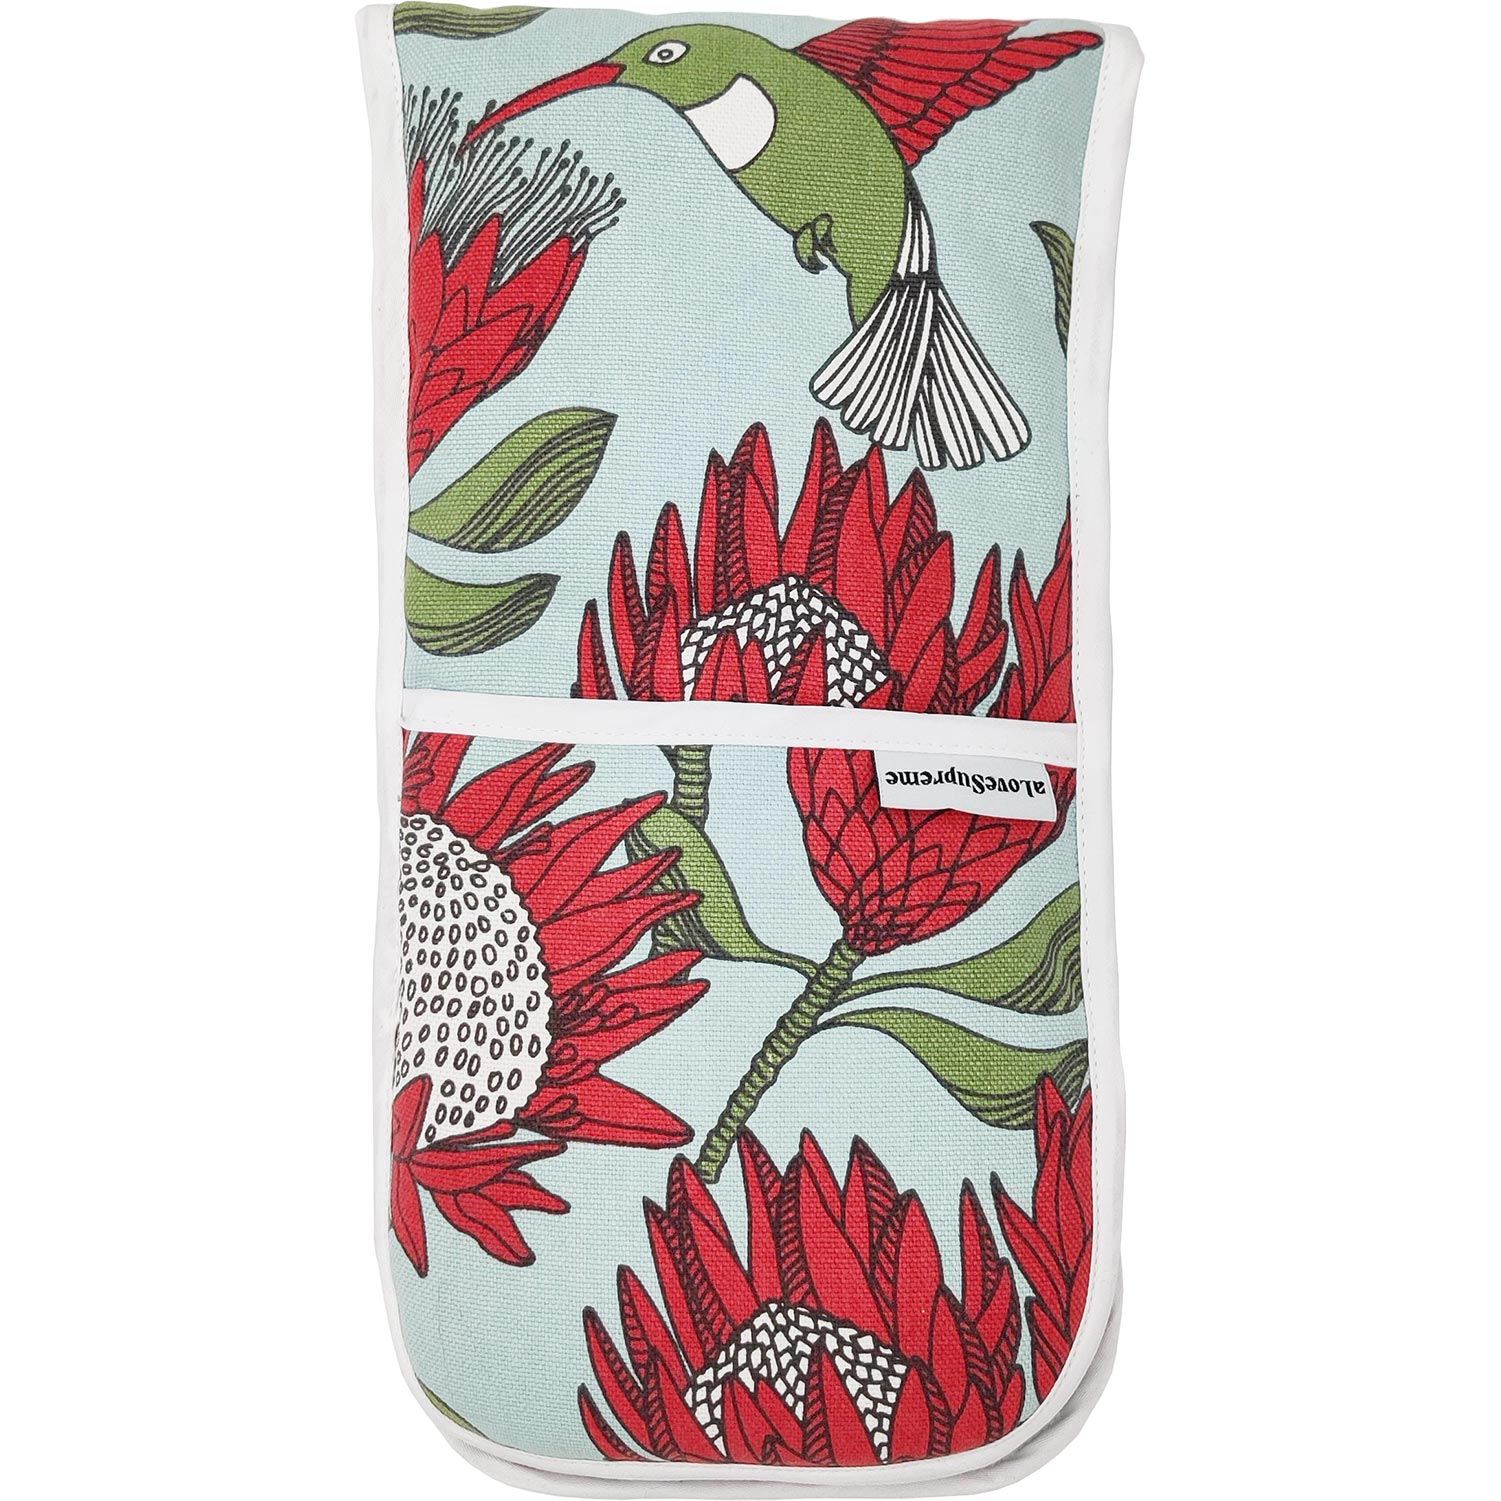 aLoveSupreme Cotton Oven Gloves with Proteas Kitchen Textiles aLoveSupreme double joined gloves blue 